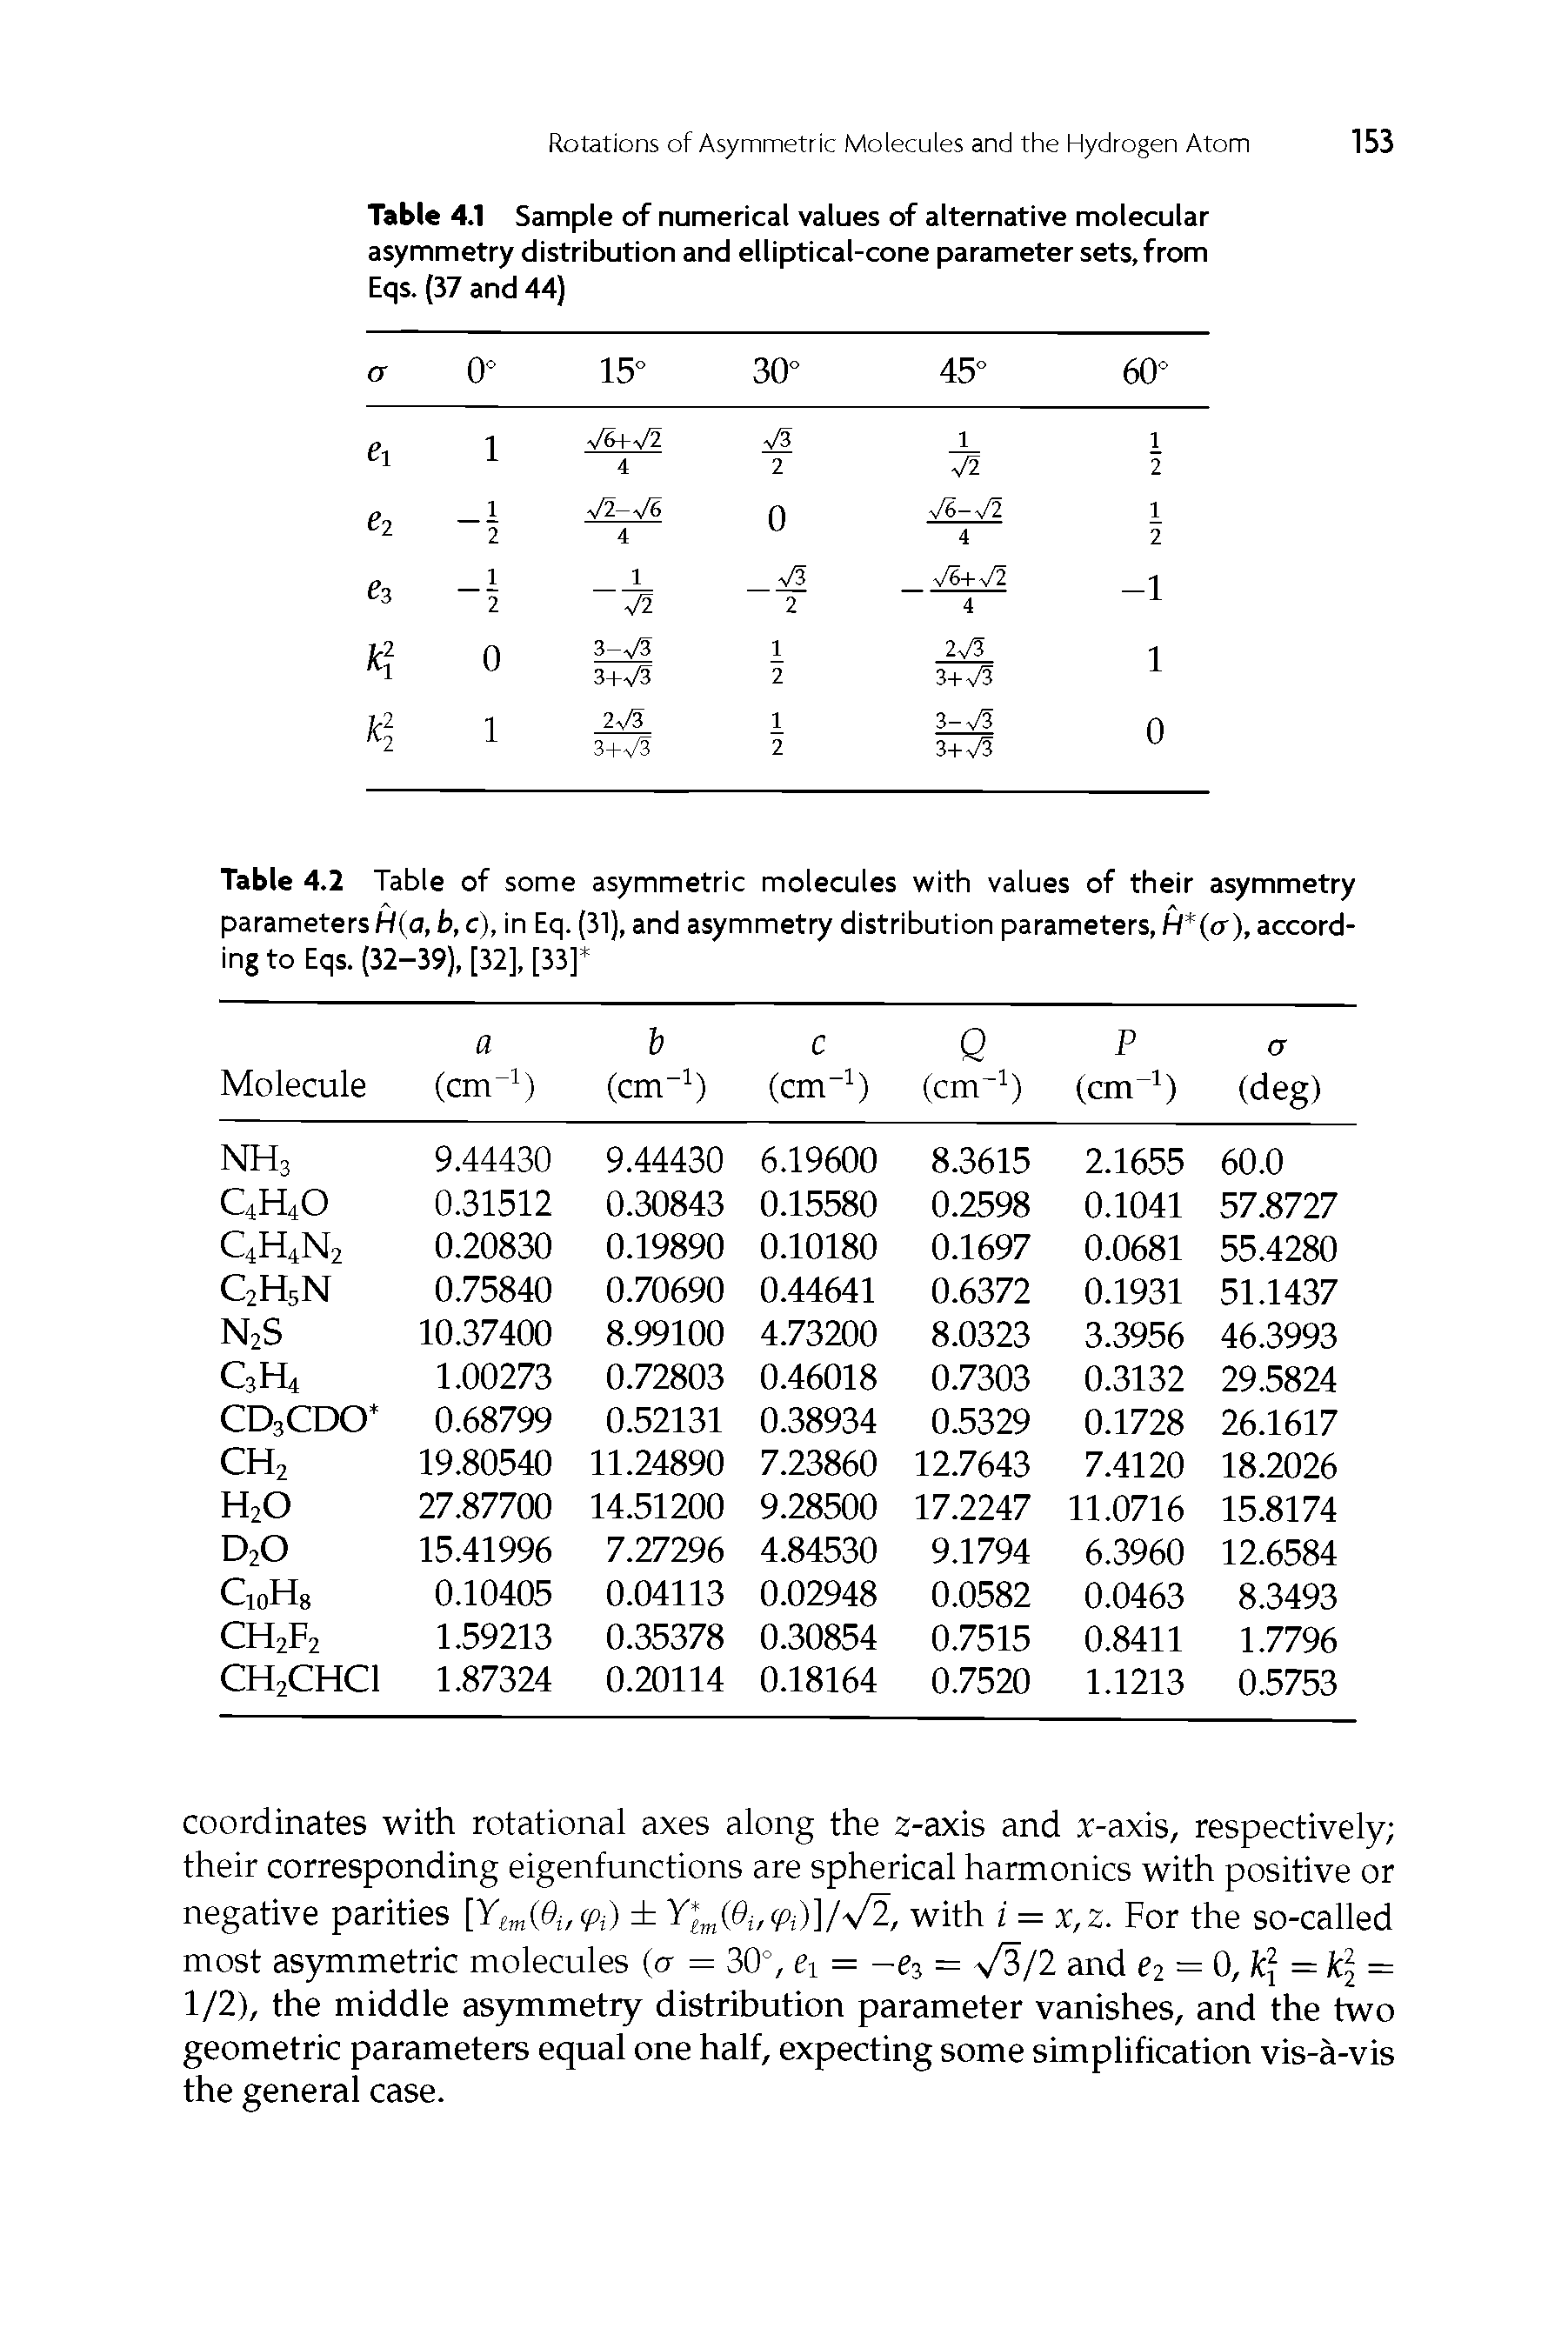 Table 4.1 Sample of numerical values of alternative molecular asymmetry distribution and elliptical-cone parameter sets, from Eqs. (37 and 44)...